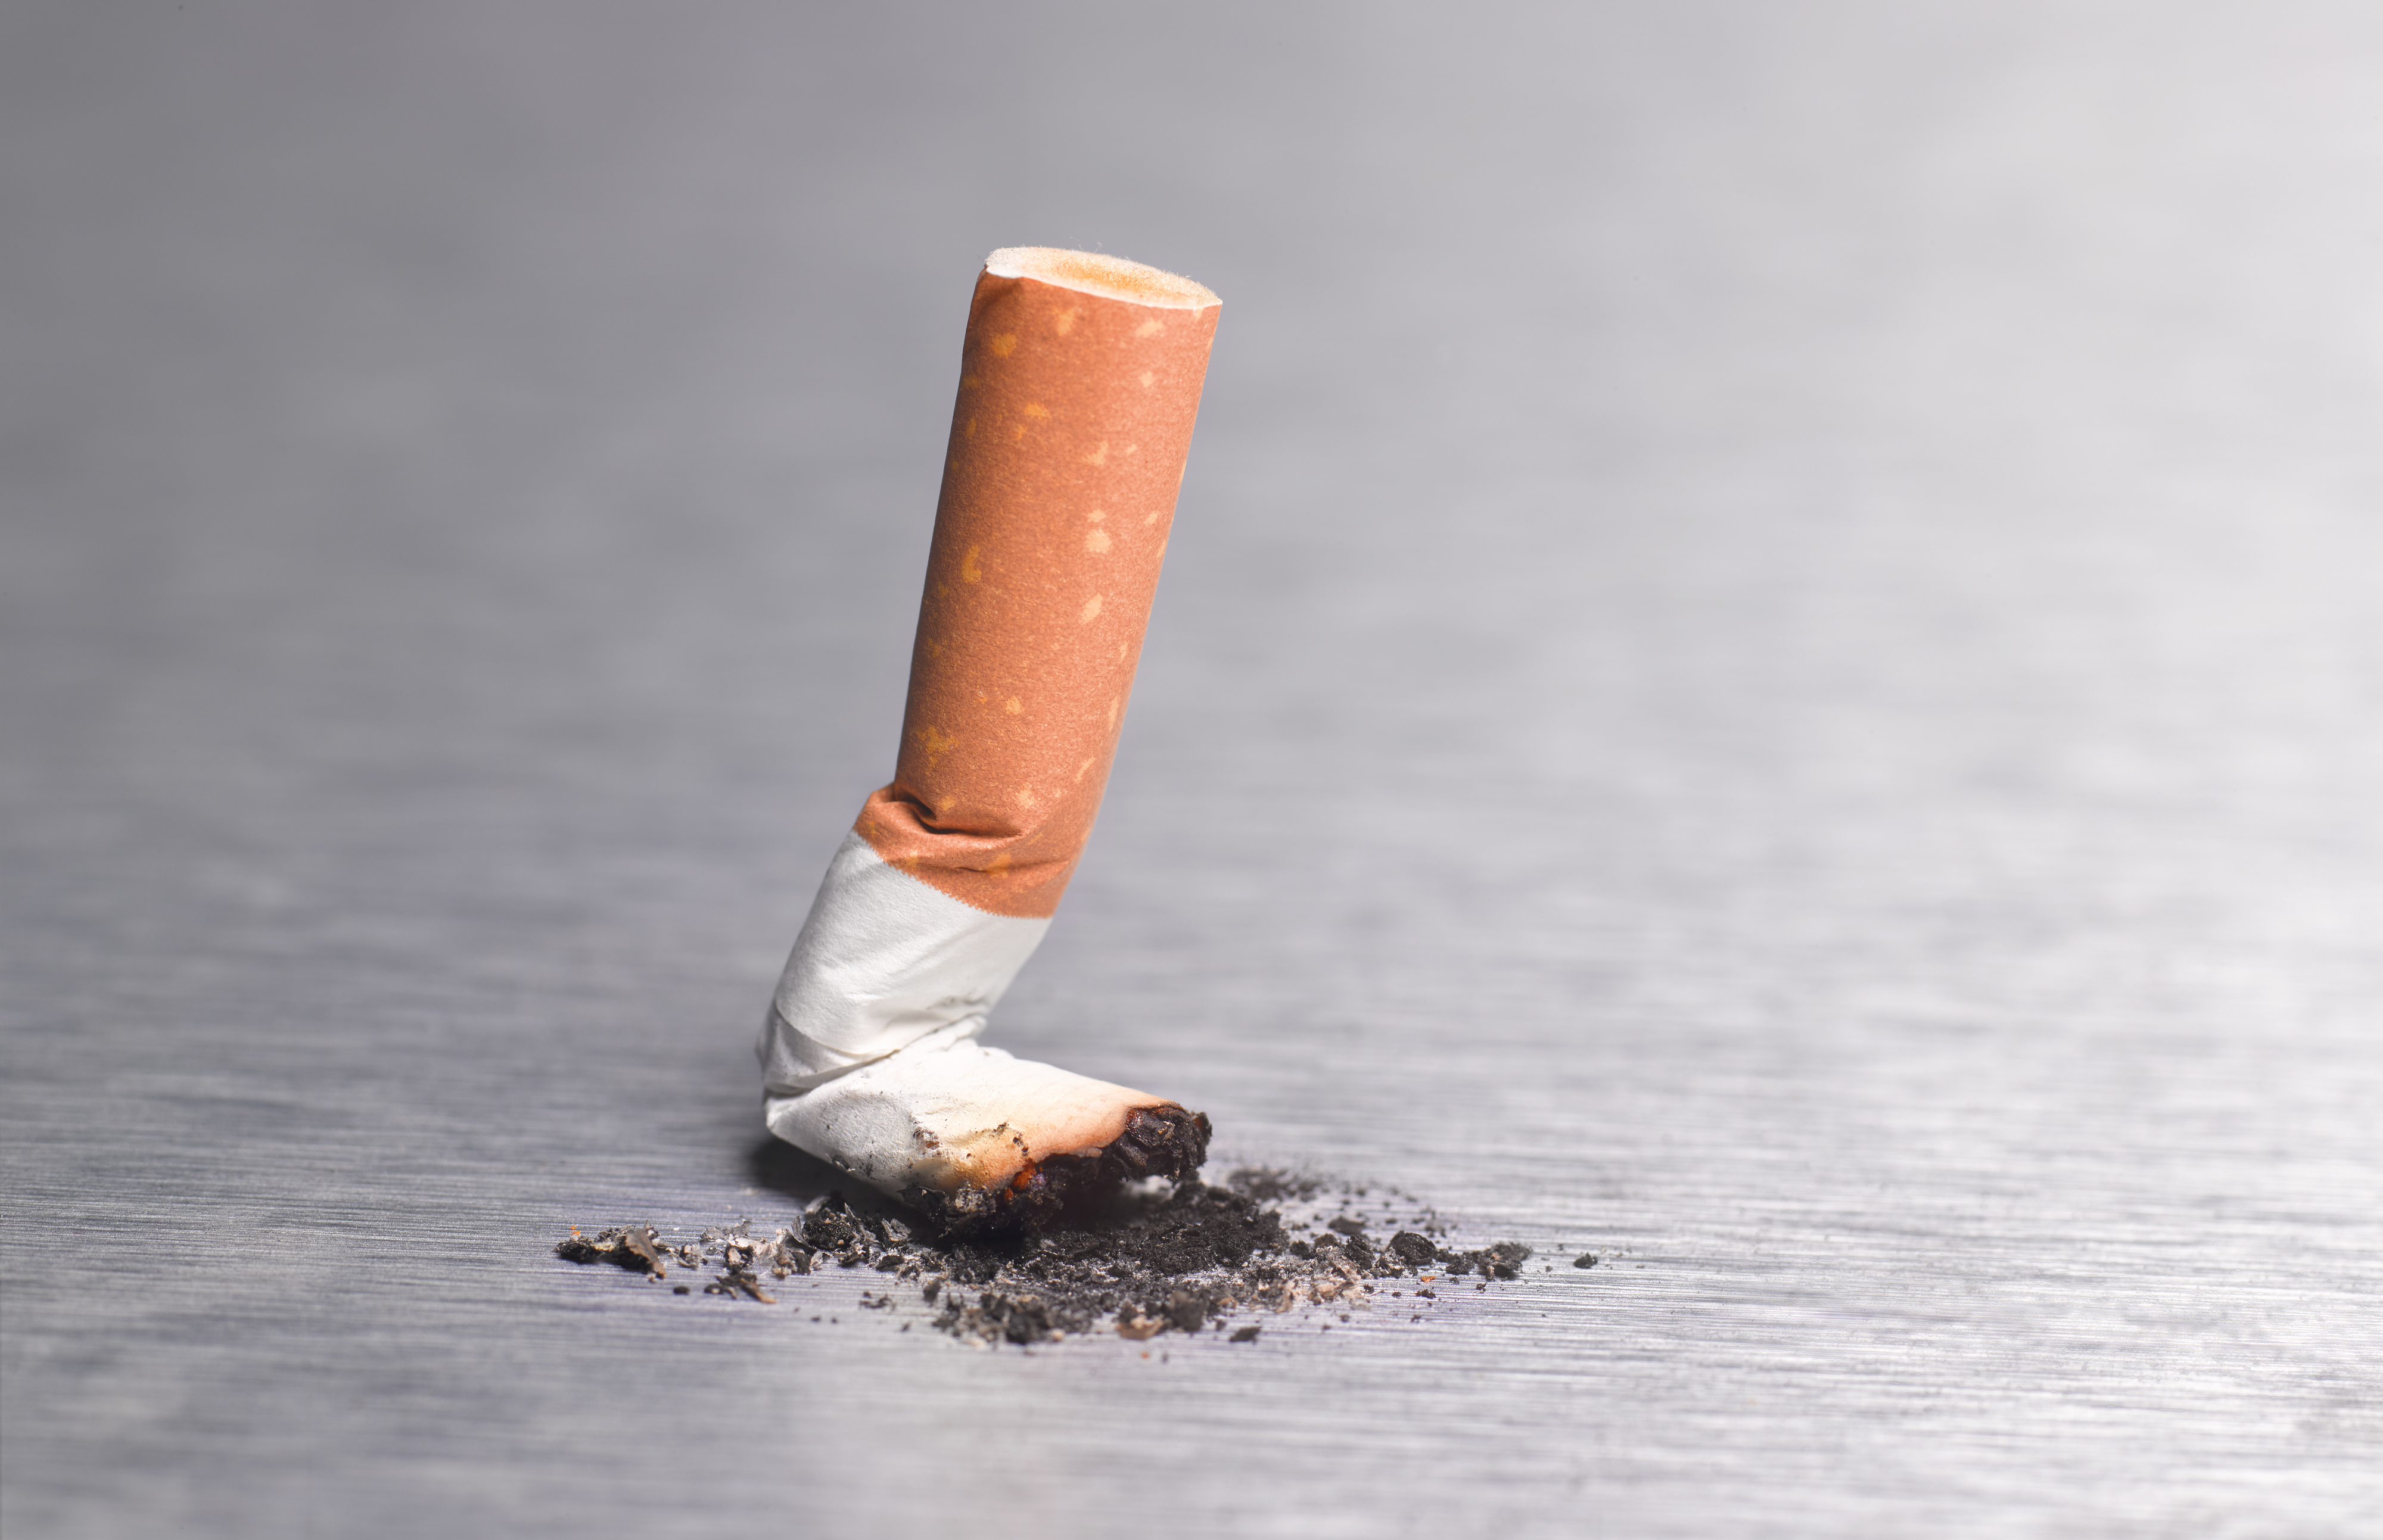 Extinguished cigarette butt on a surface, concept for smoking cessation and health awareness